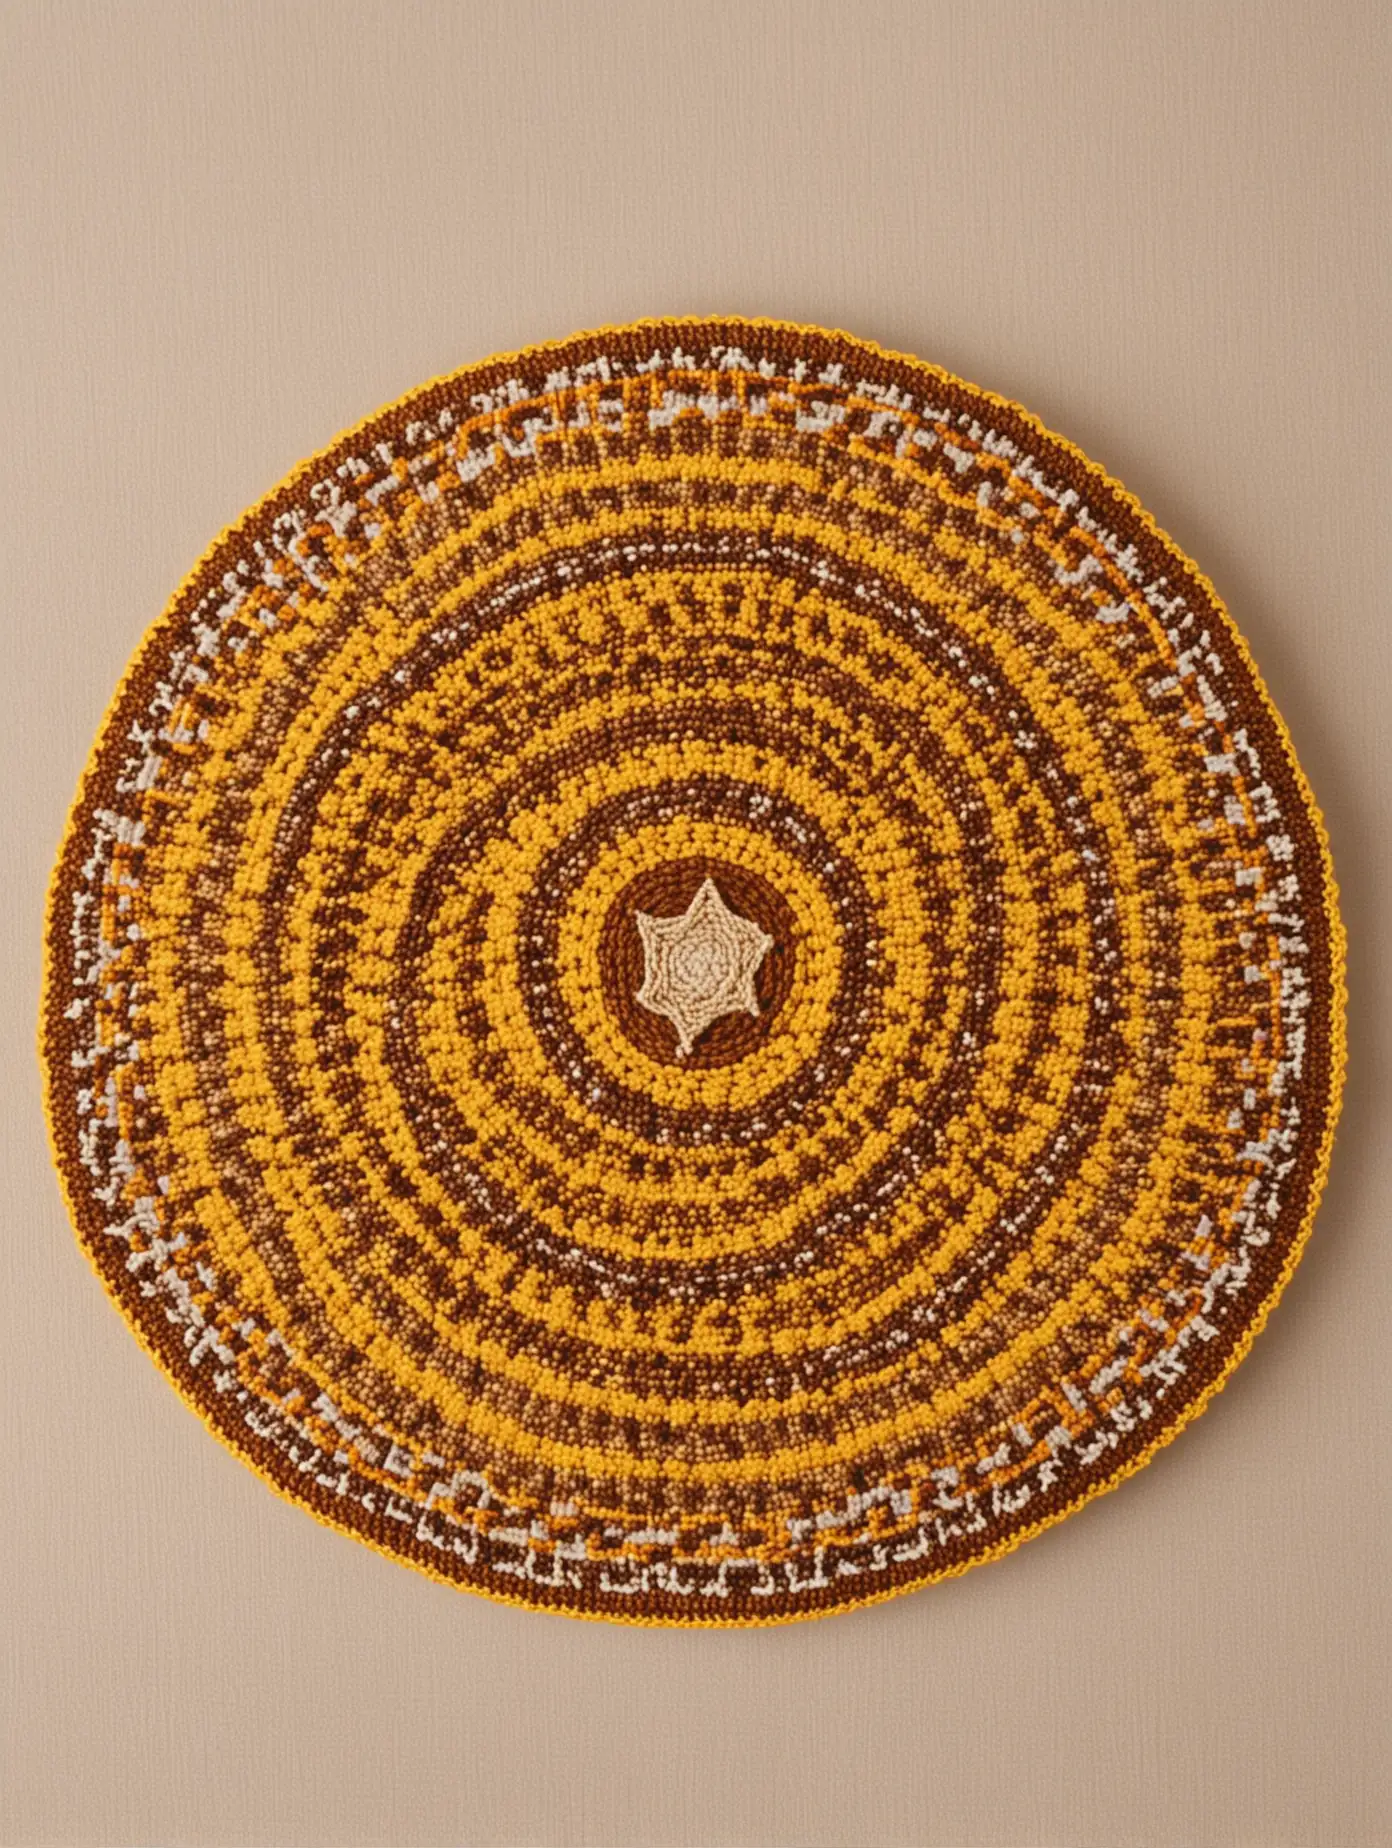 Israeli Round Knitted Kippah with Yellow and Brown Jewish Style Decorations